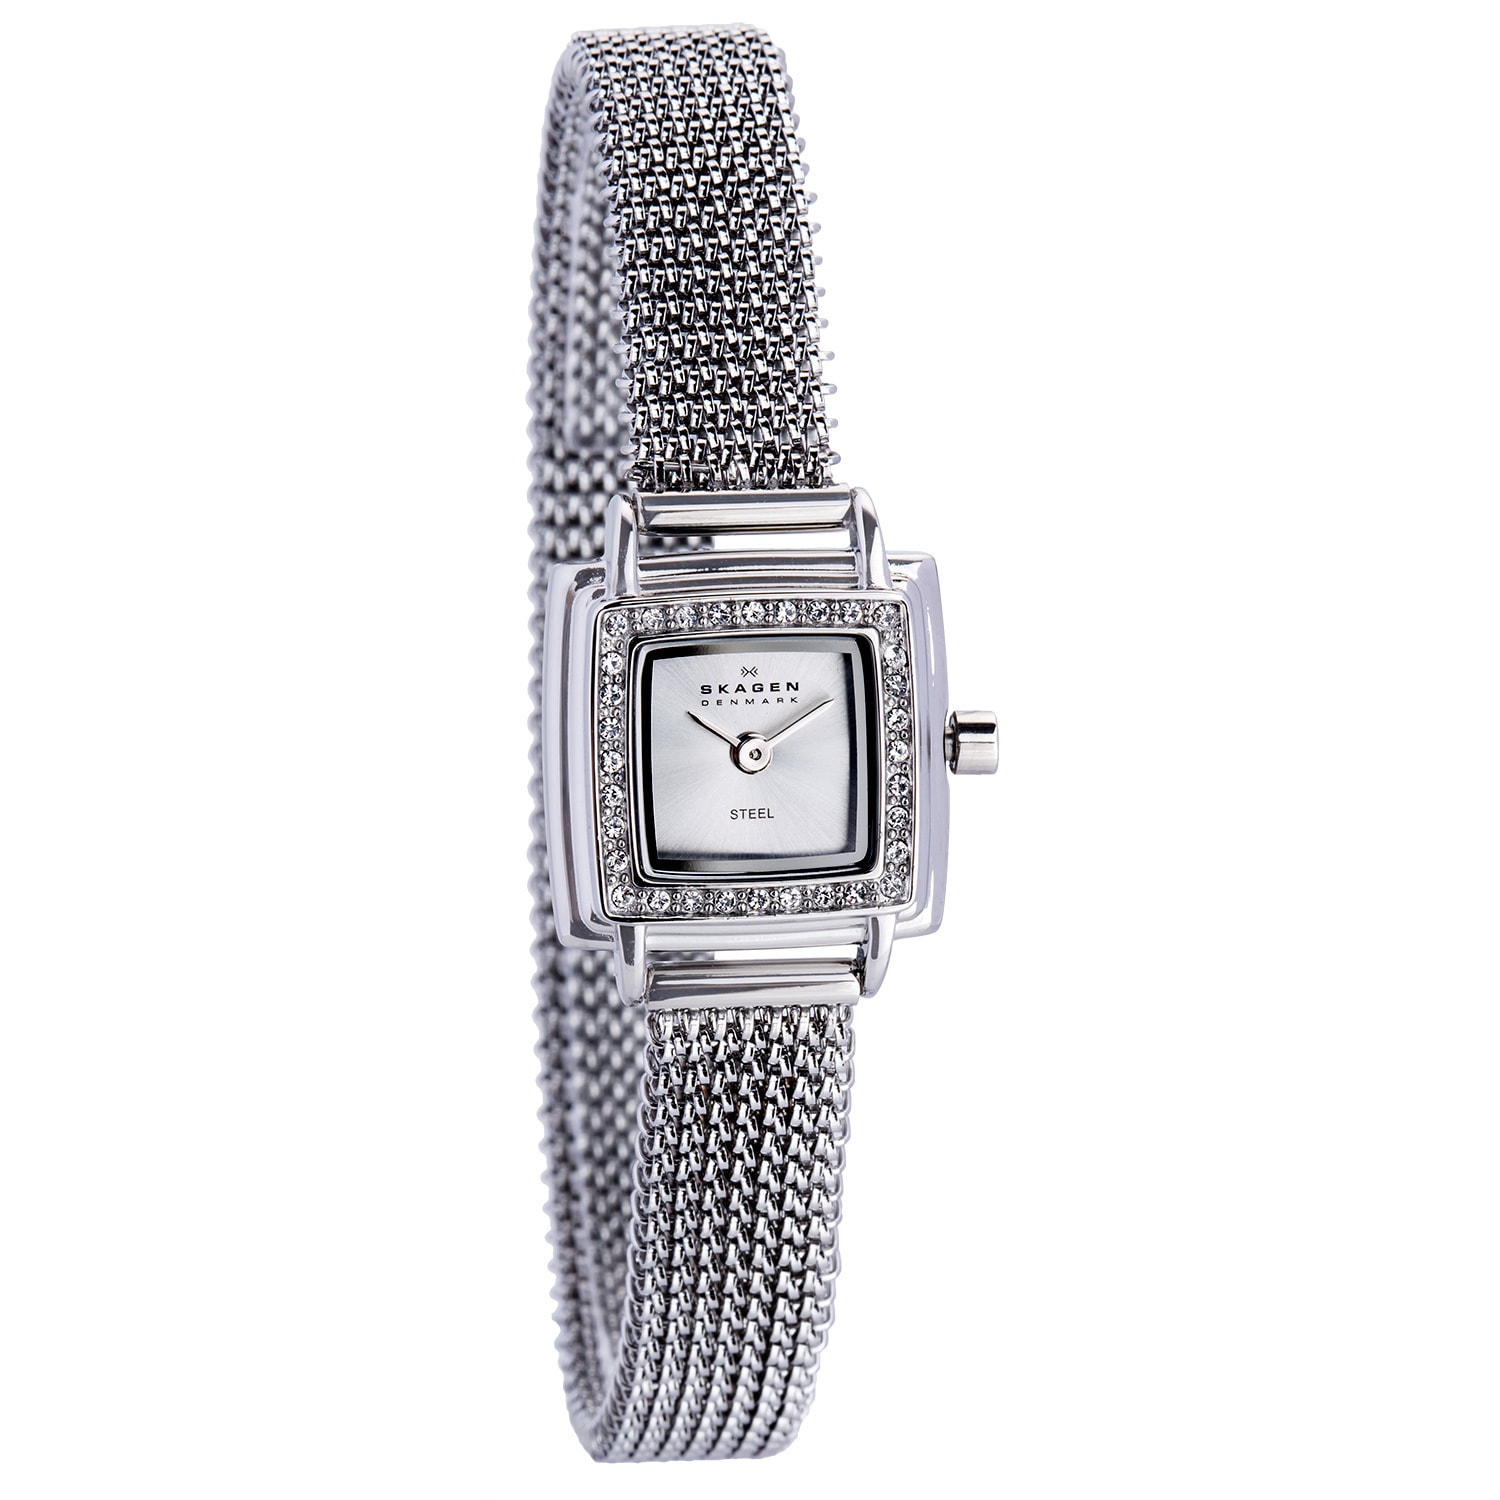 Skagen Womens Stainless Steel Crystal Watch Was $99.99 Today $69.99